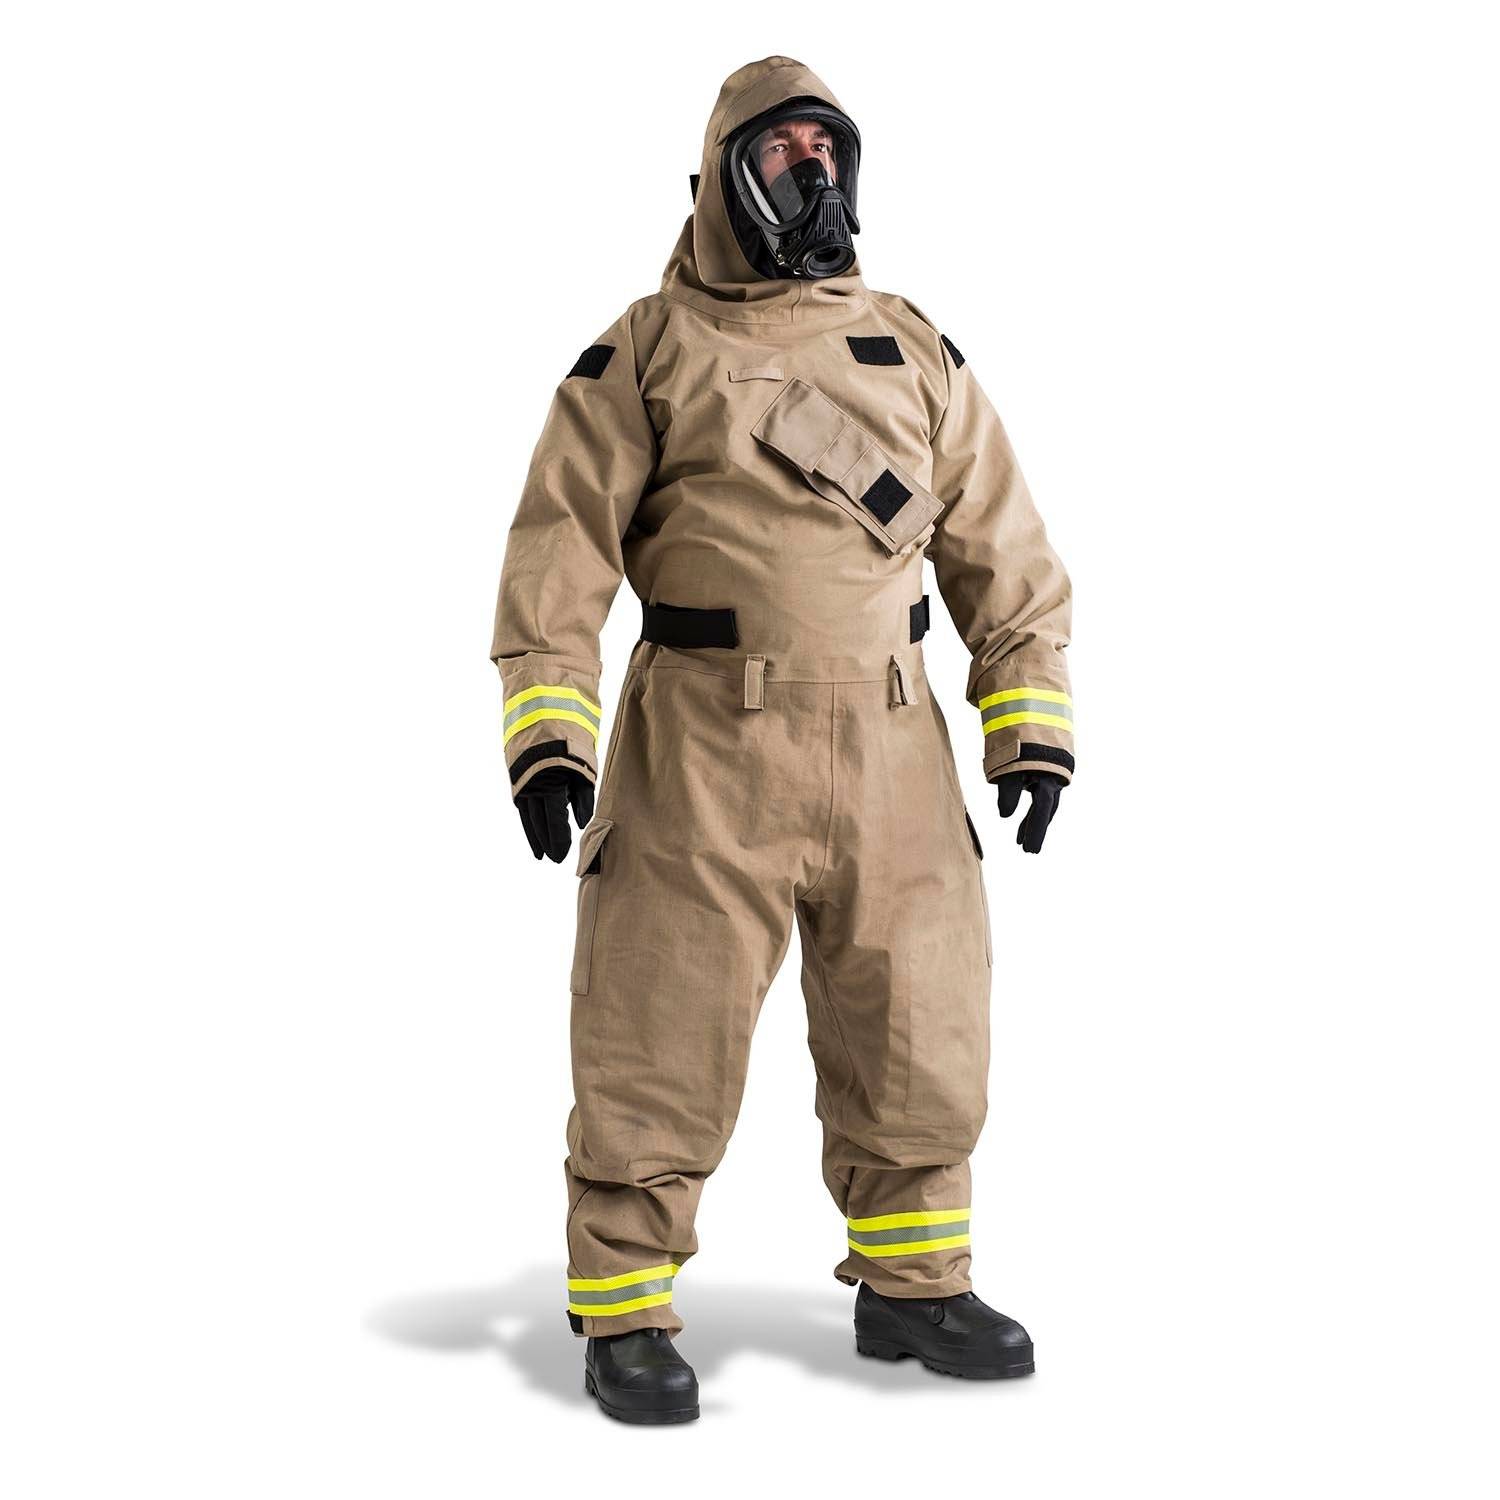 LION MT94 NFPA MAXIMUM PROTECTION AND MOBILITY SUIT W/ RADIO